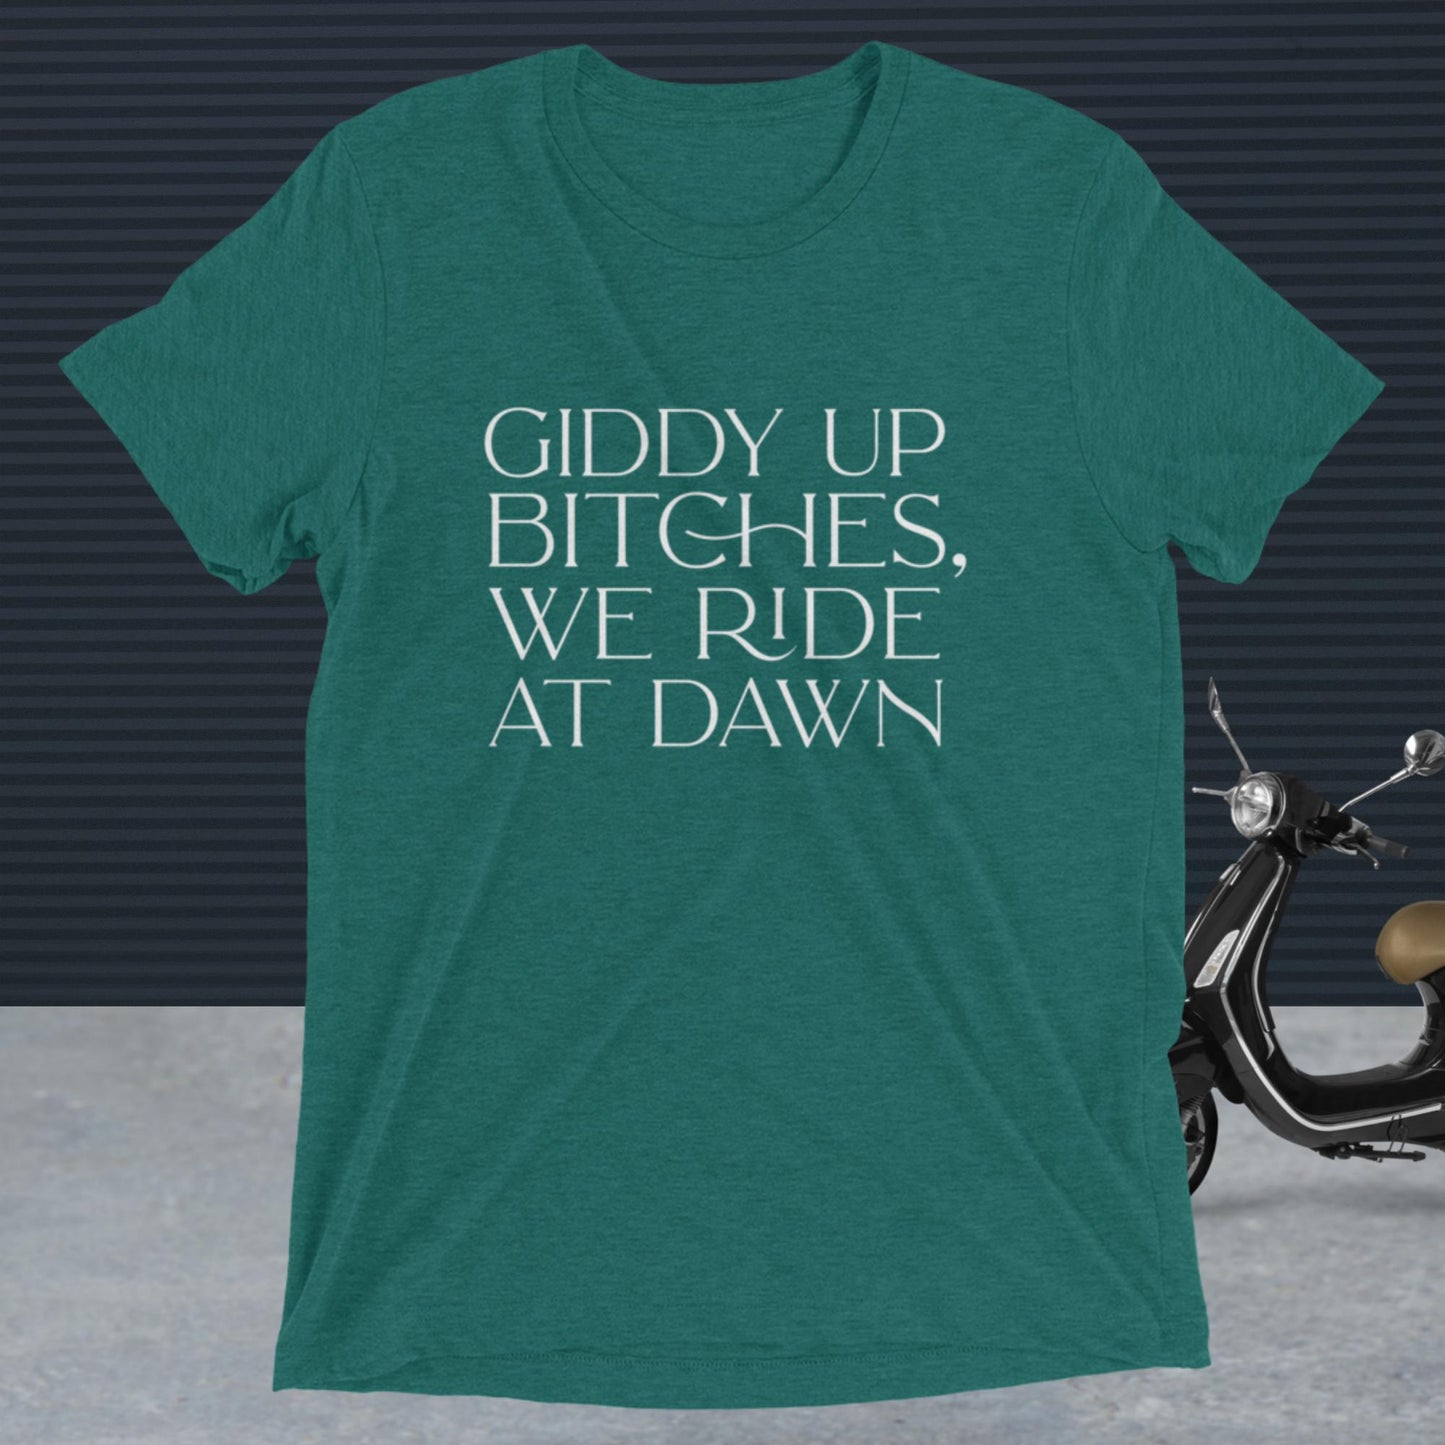 Giddy Up Bitches Short sleeve t-shirt